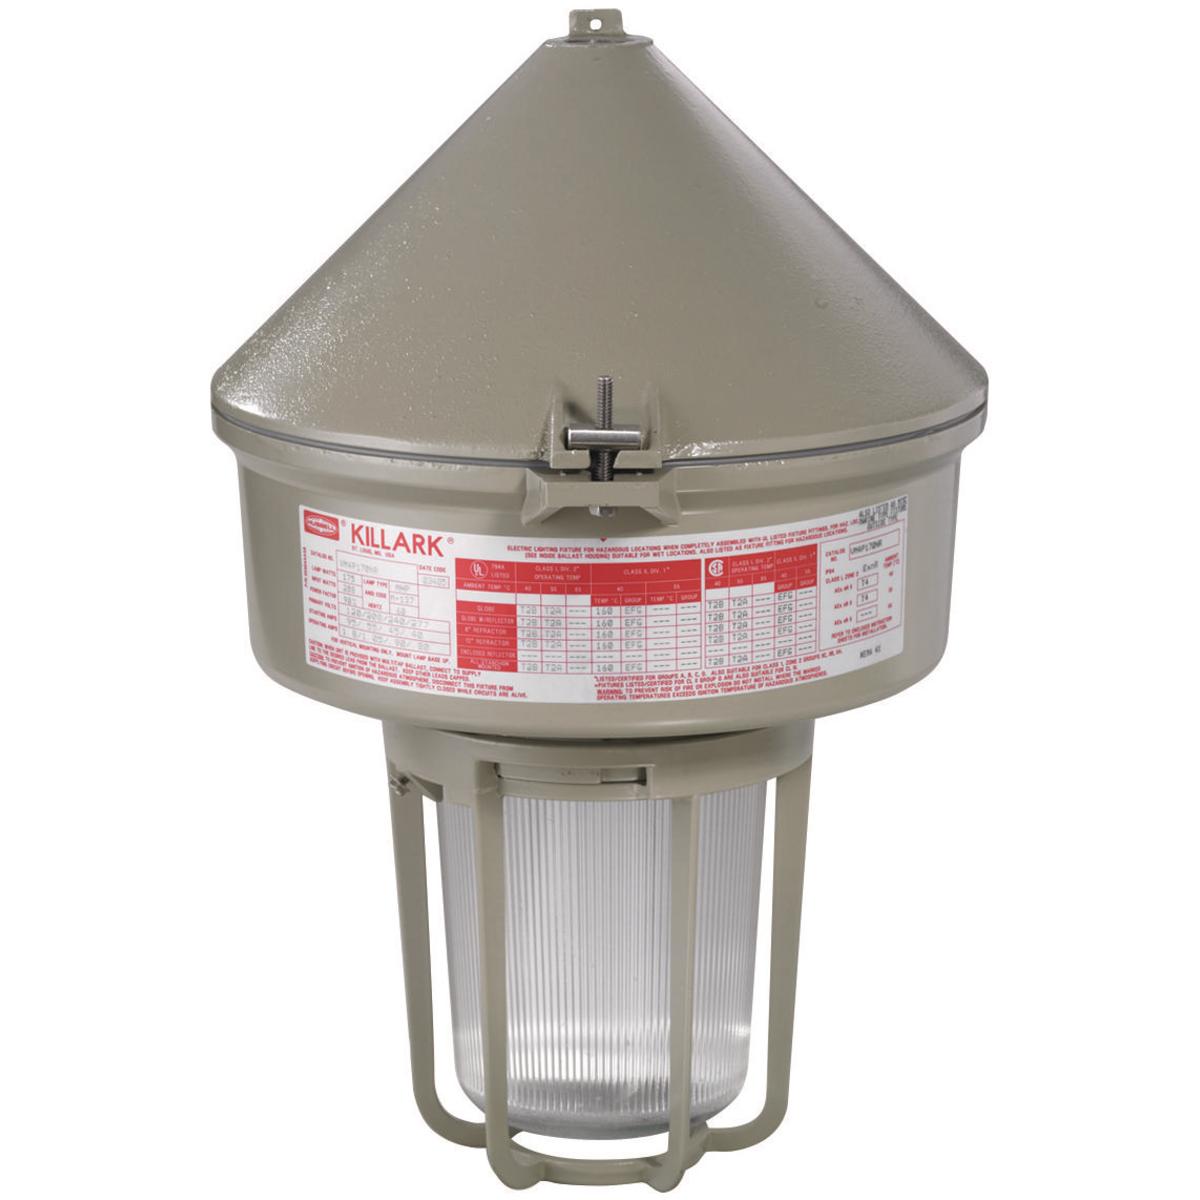 Hubbell VM3H070C2R1G VM3 Series - 70W Metal Halide Quadri-Volt - 3/4" Cone Top - Type I Glass Refractor and Guard  ; Ballast tank and splice box – corrosion resistant copper-free aluminum alloy with baked powder epoxy/polyester finish, electrostatically applied for complete, 